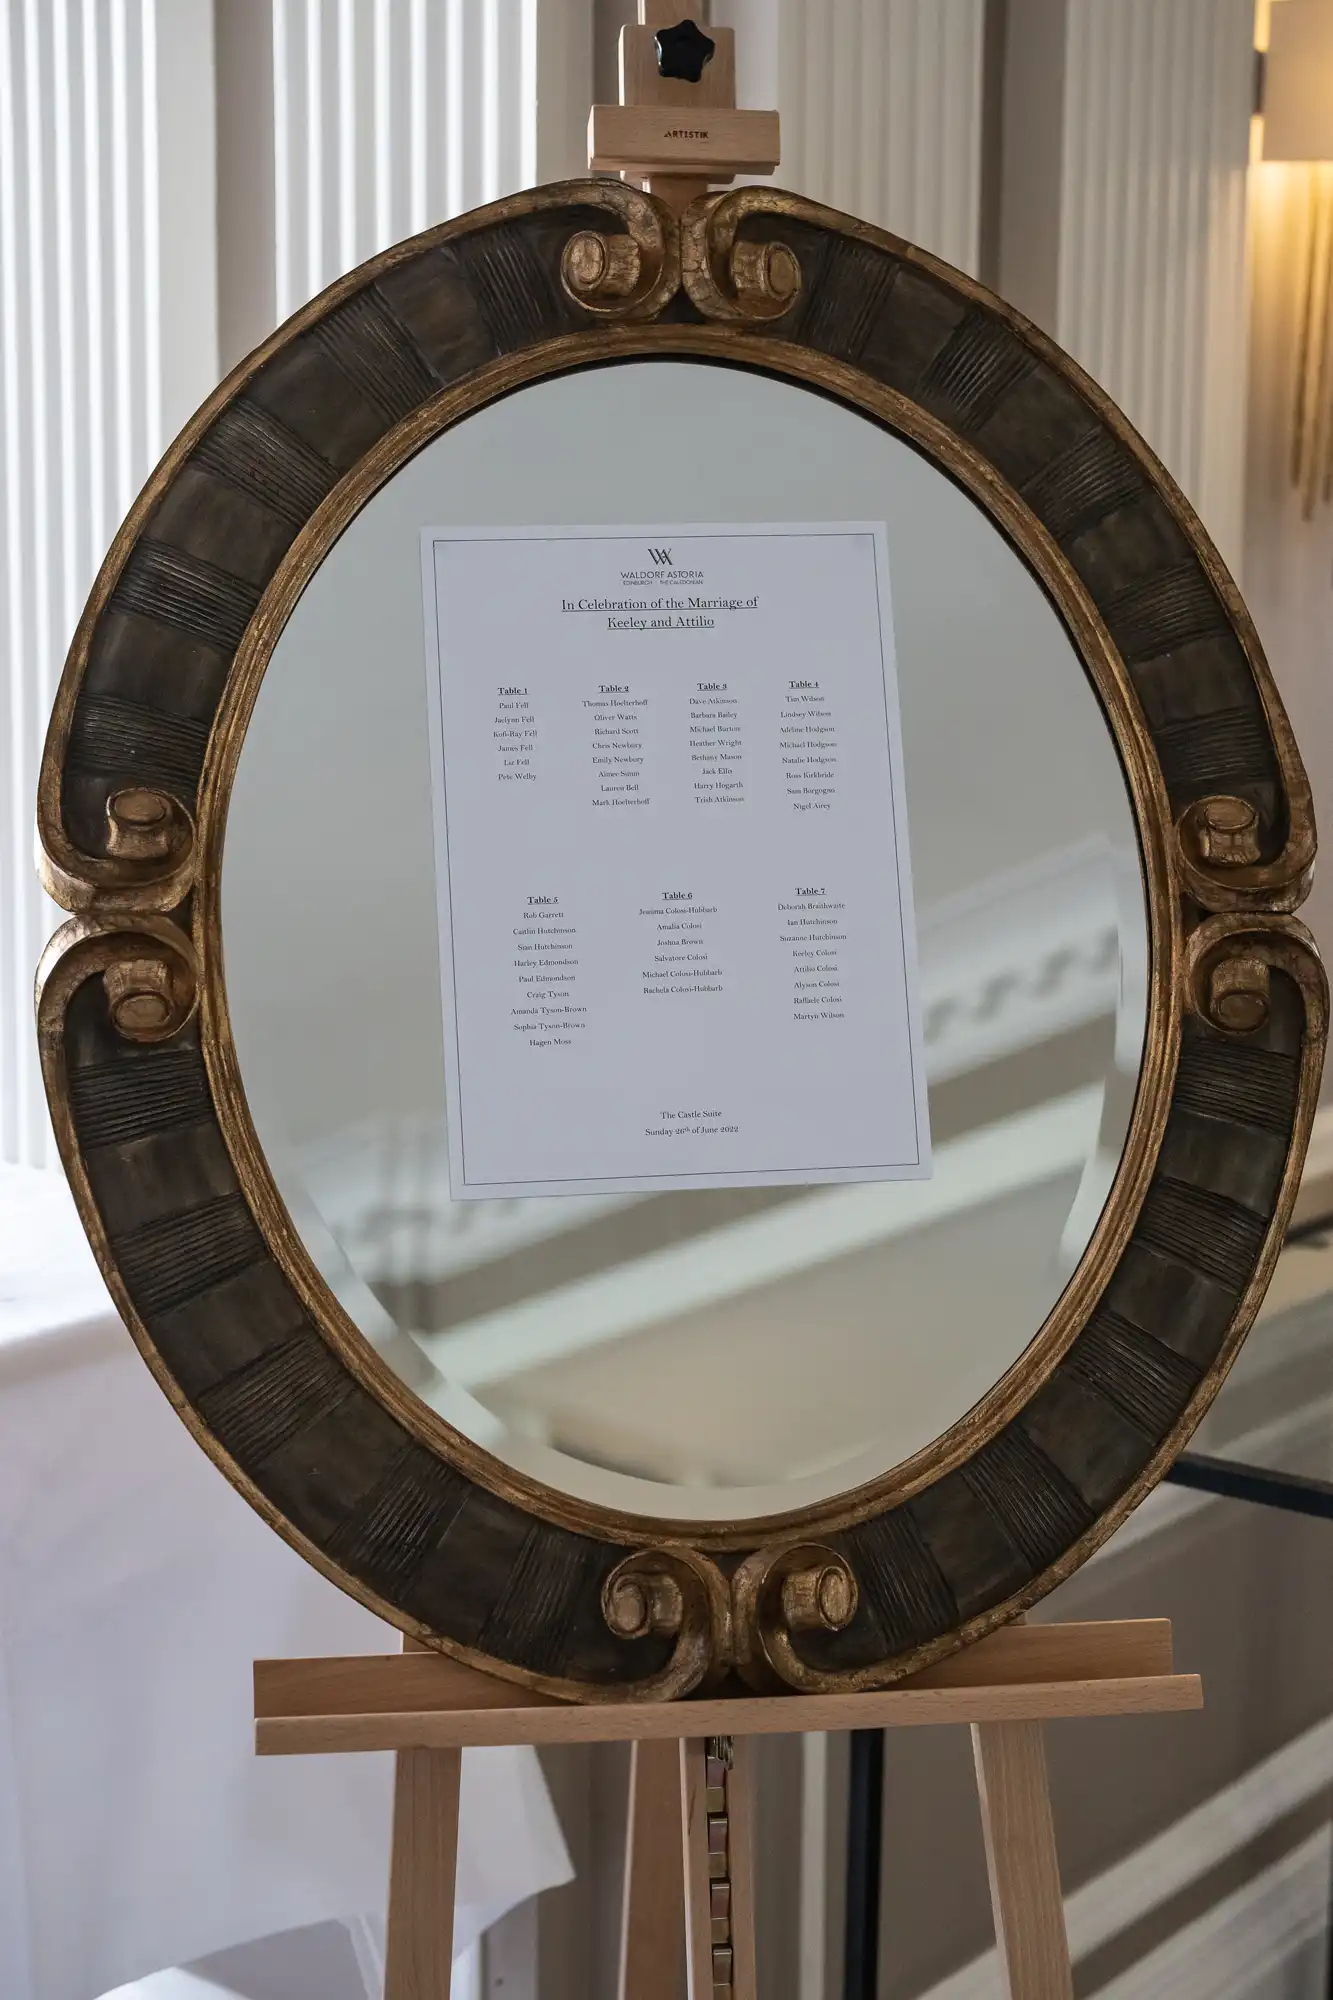 An ornate oval gold frame on an easel displaying a menu, situated in an elegant room with soft lighting.